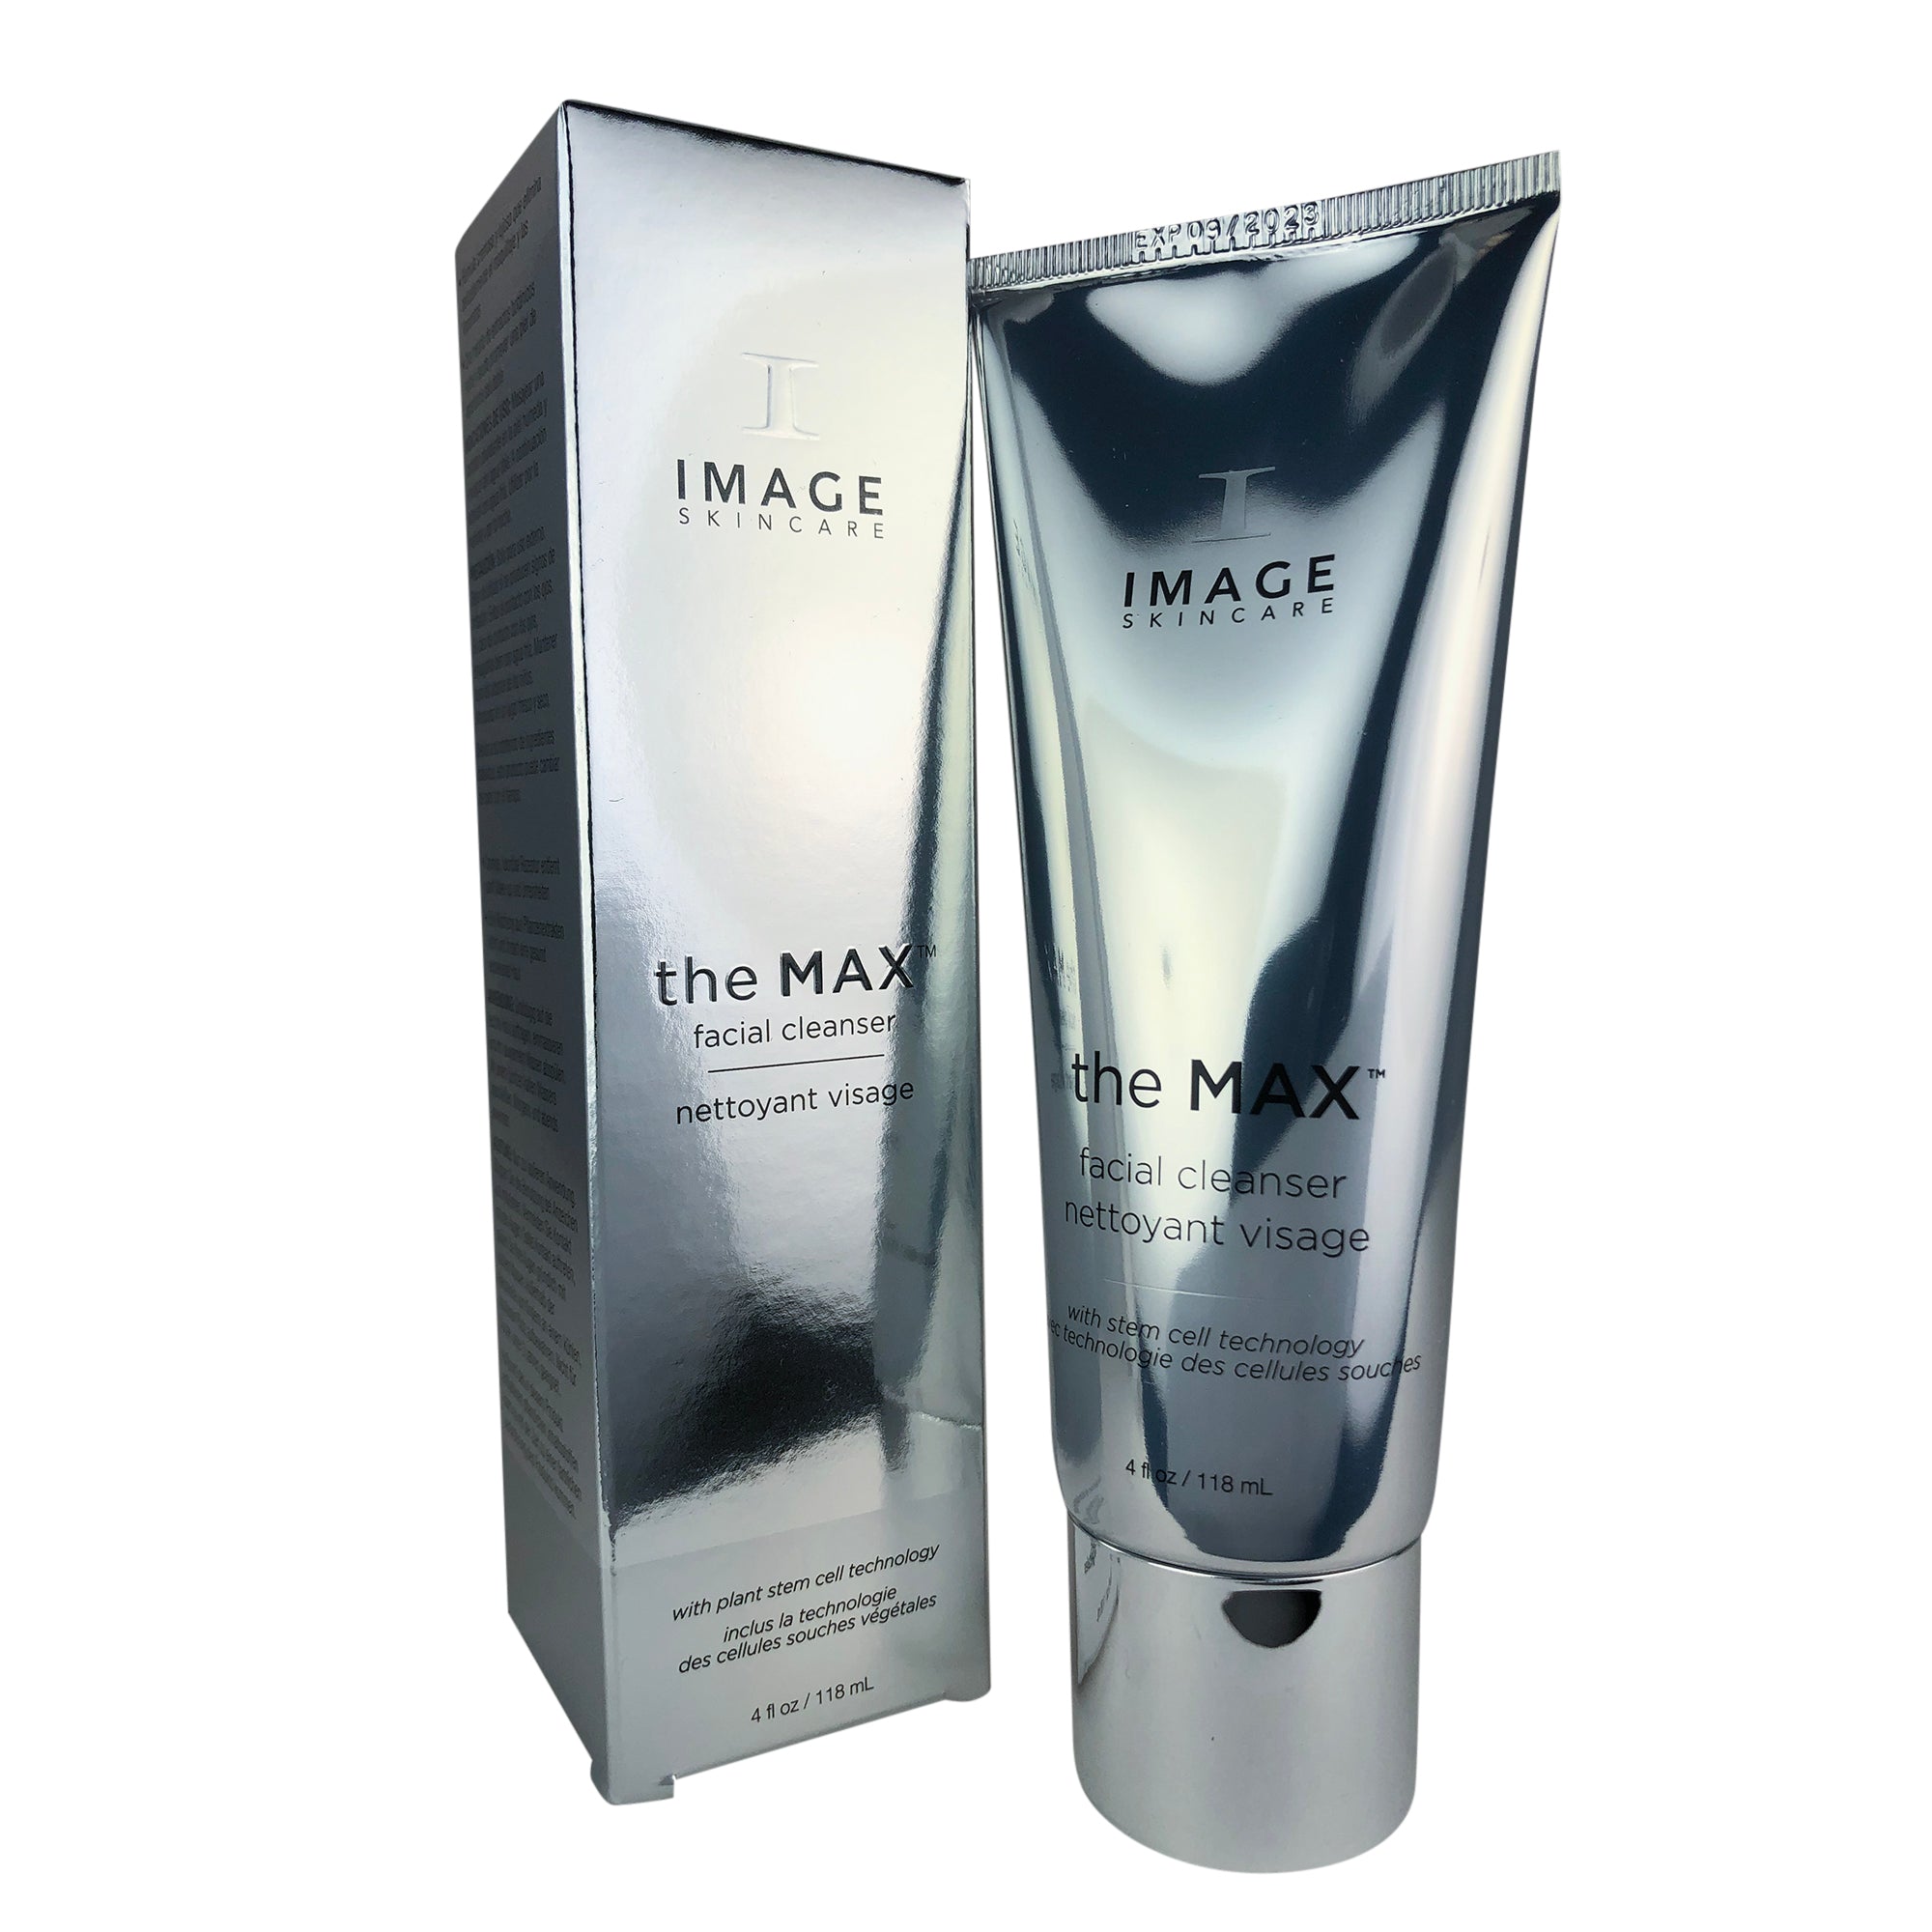 Image Skincare the MAX Stem Cell Facial Cleanser